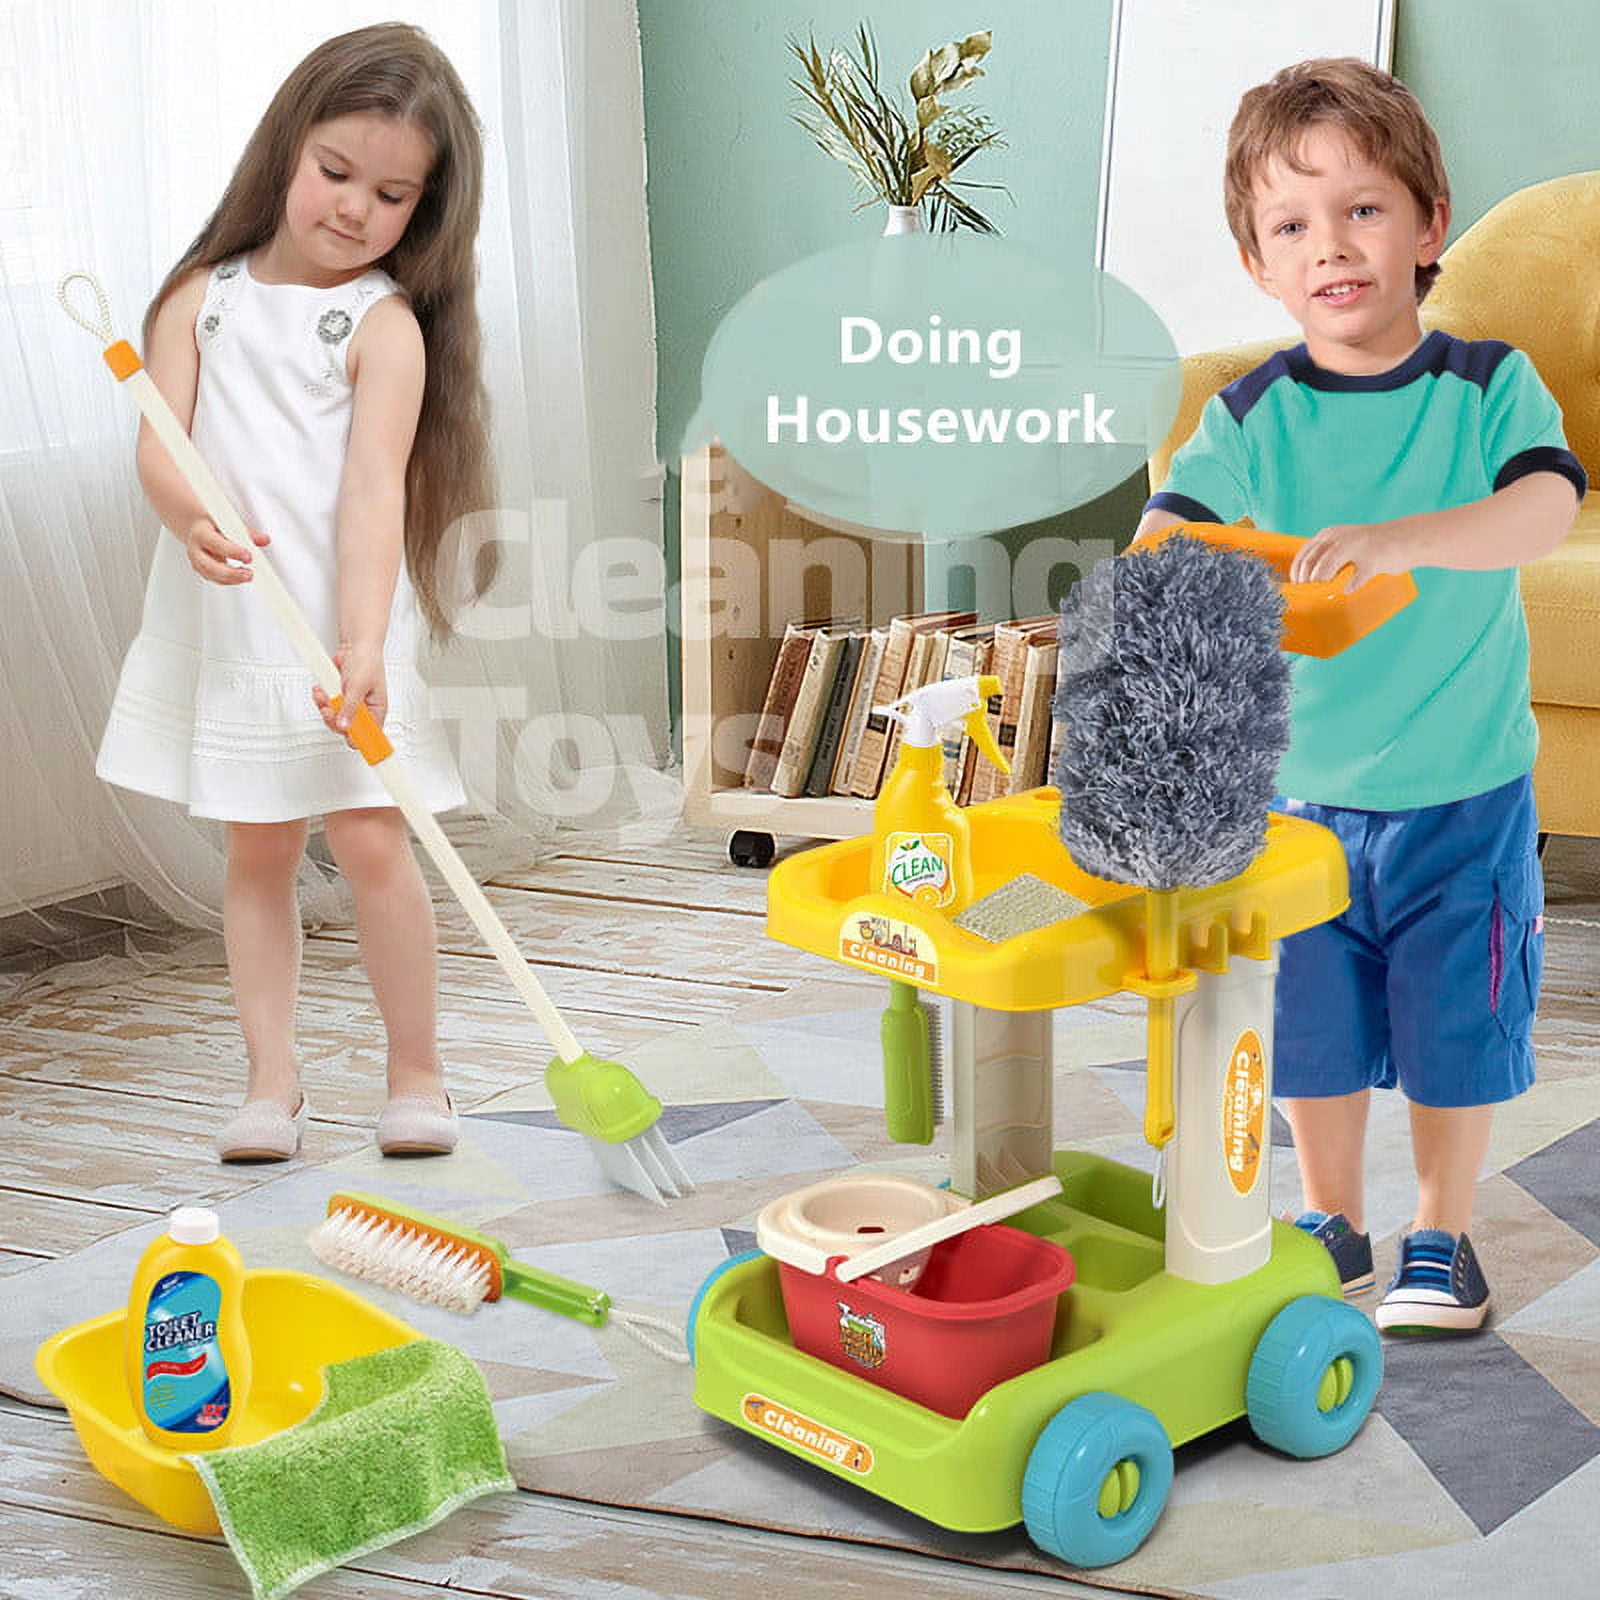  Kidoozie Cleaning Essentials Playset - 9-Piece Pretend Play Set  with Broom, Mop, Duster, Dustpan, Bucket, and More! : Toys & Games